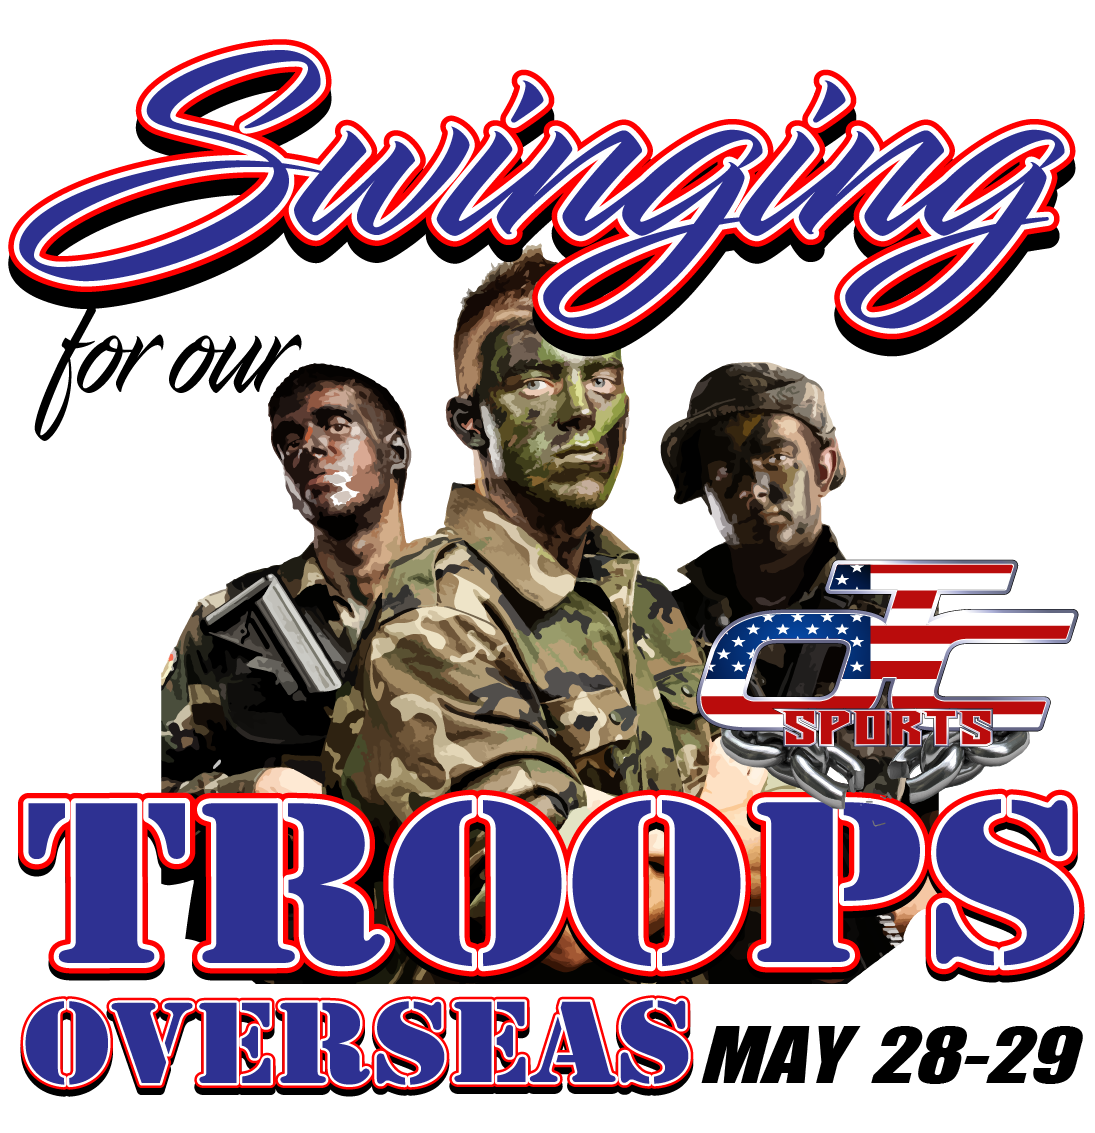 Swinging For Our Troops Overseas! Logo